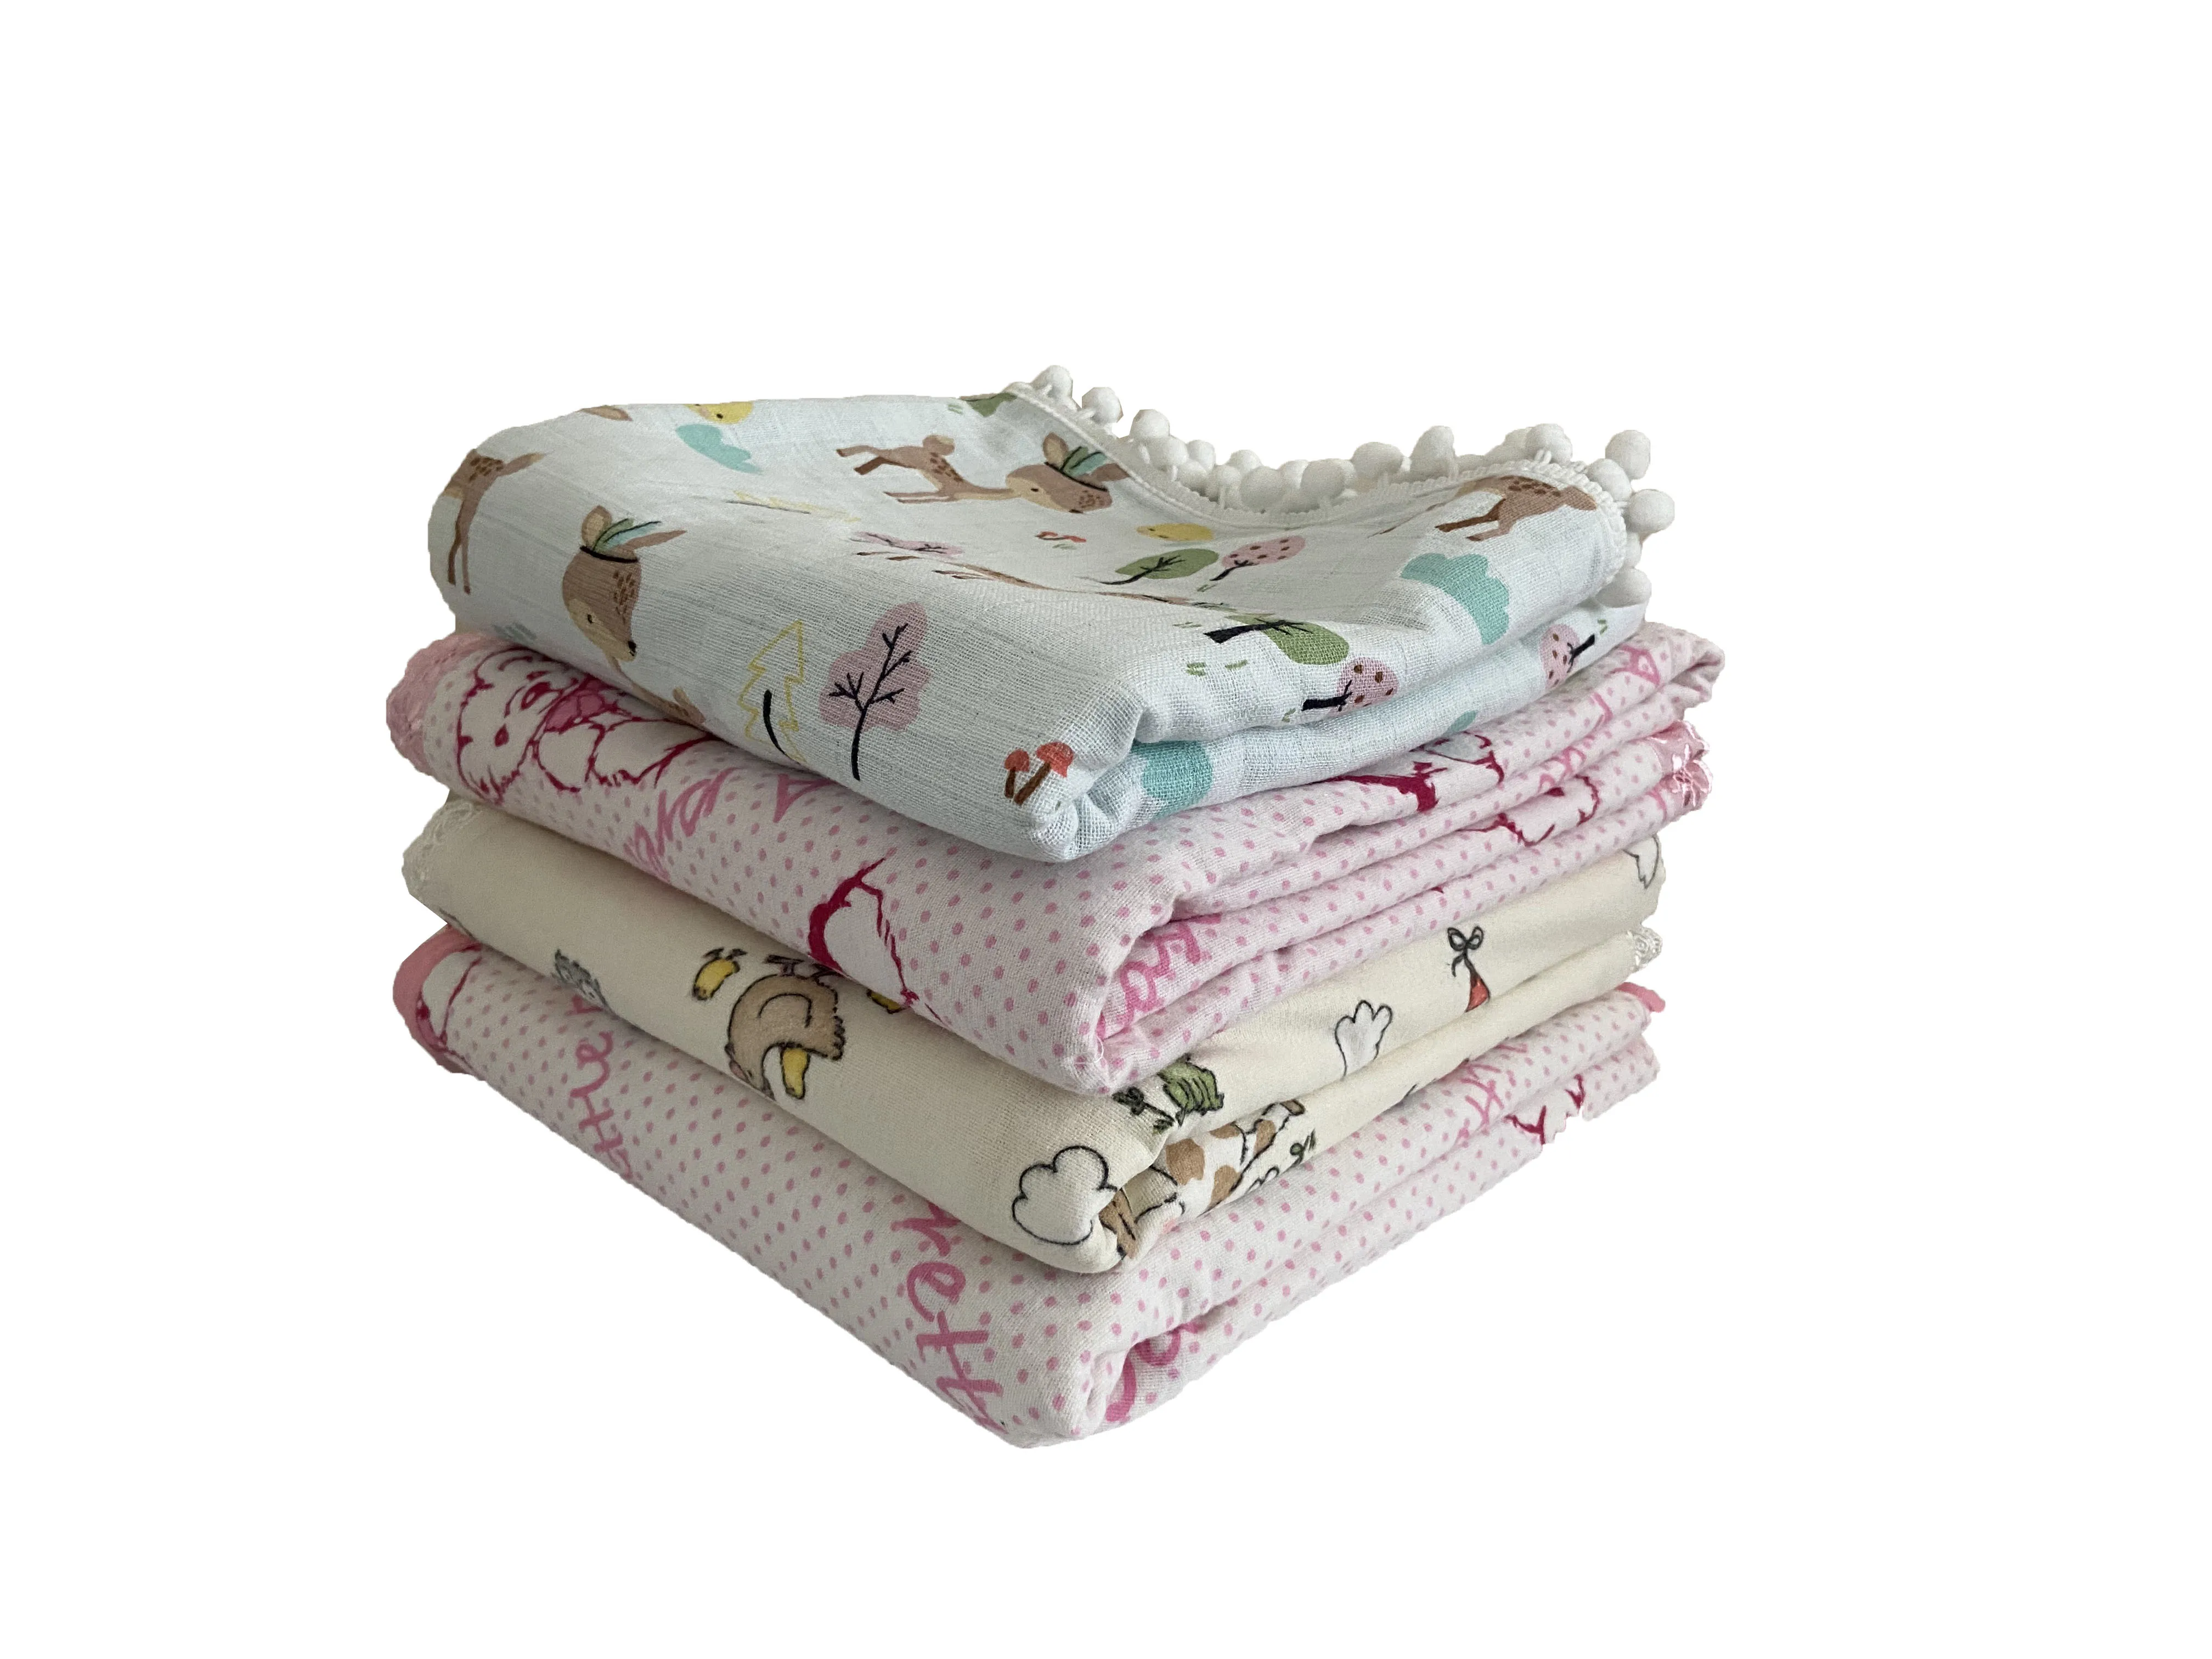 

100% Cotton Flannel Fabric Double-Sided Use With Lace Pompom Detail Doesn't Make You Sweat Keeps Warm 4-Season Baby Blanket